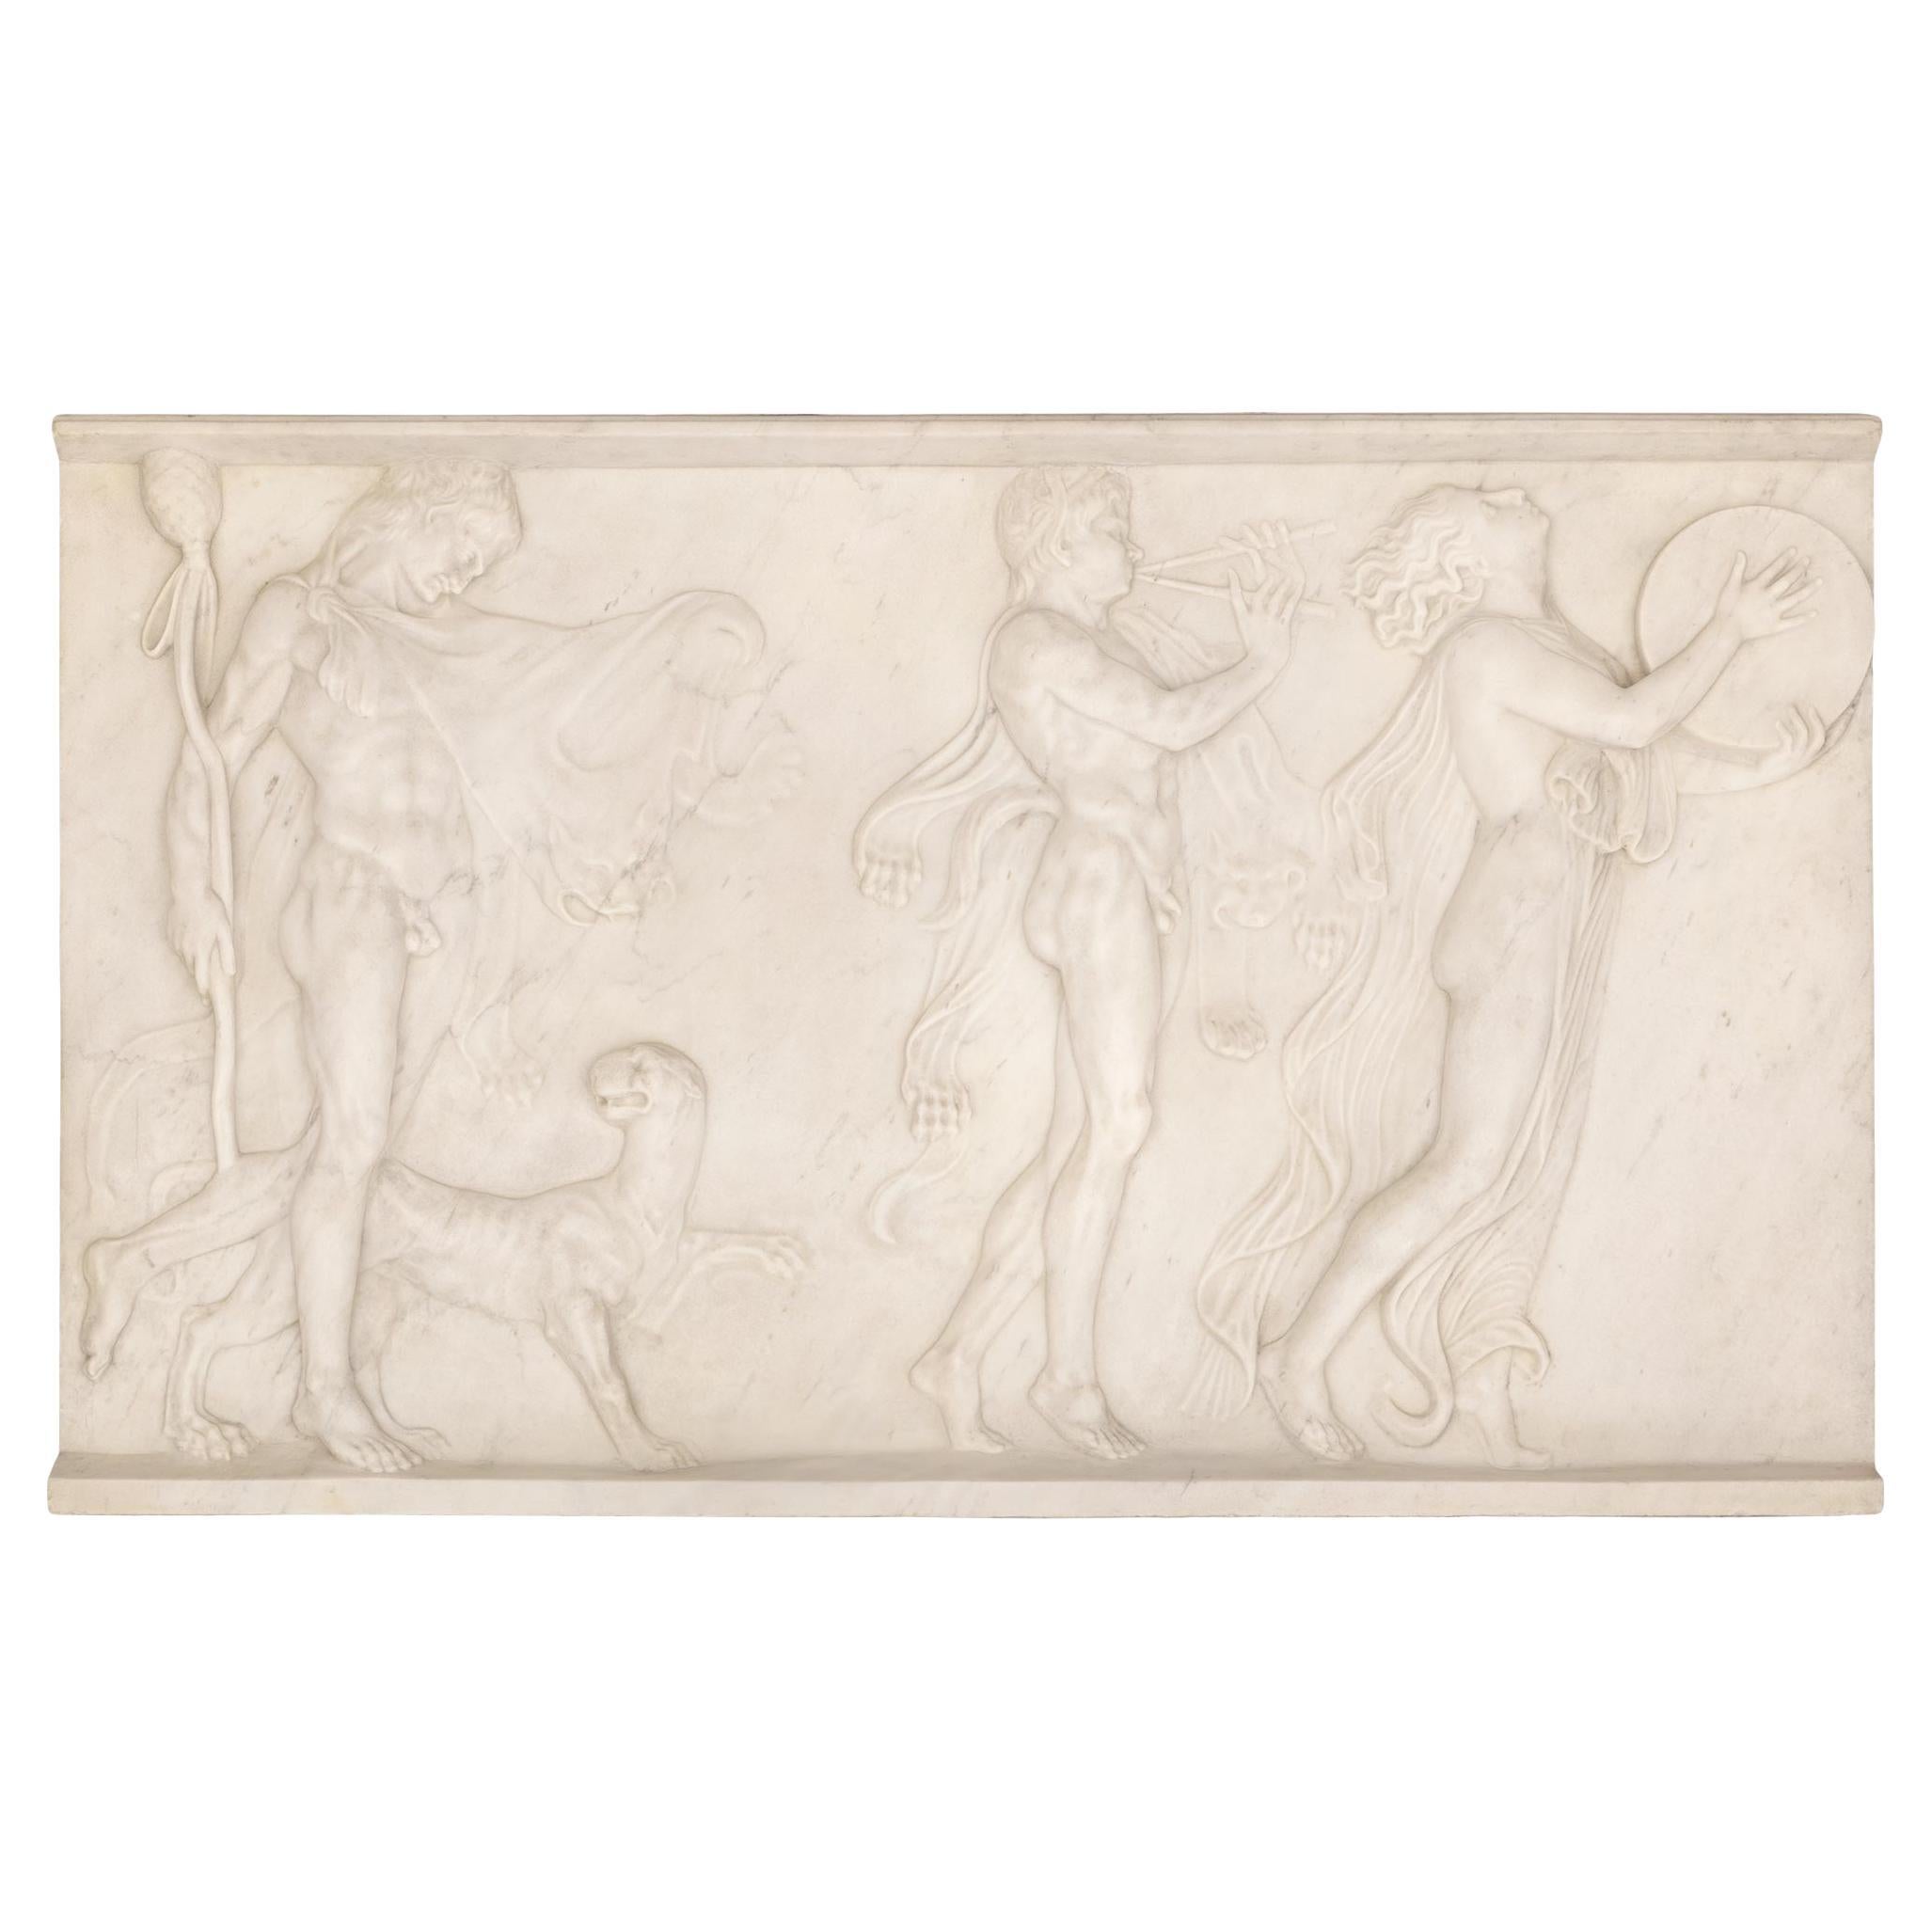 Italian 19th Century Neoclassical St. Marble Wall Decor Relief Plaque